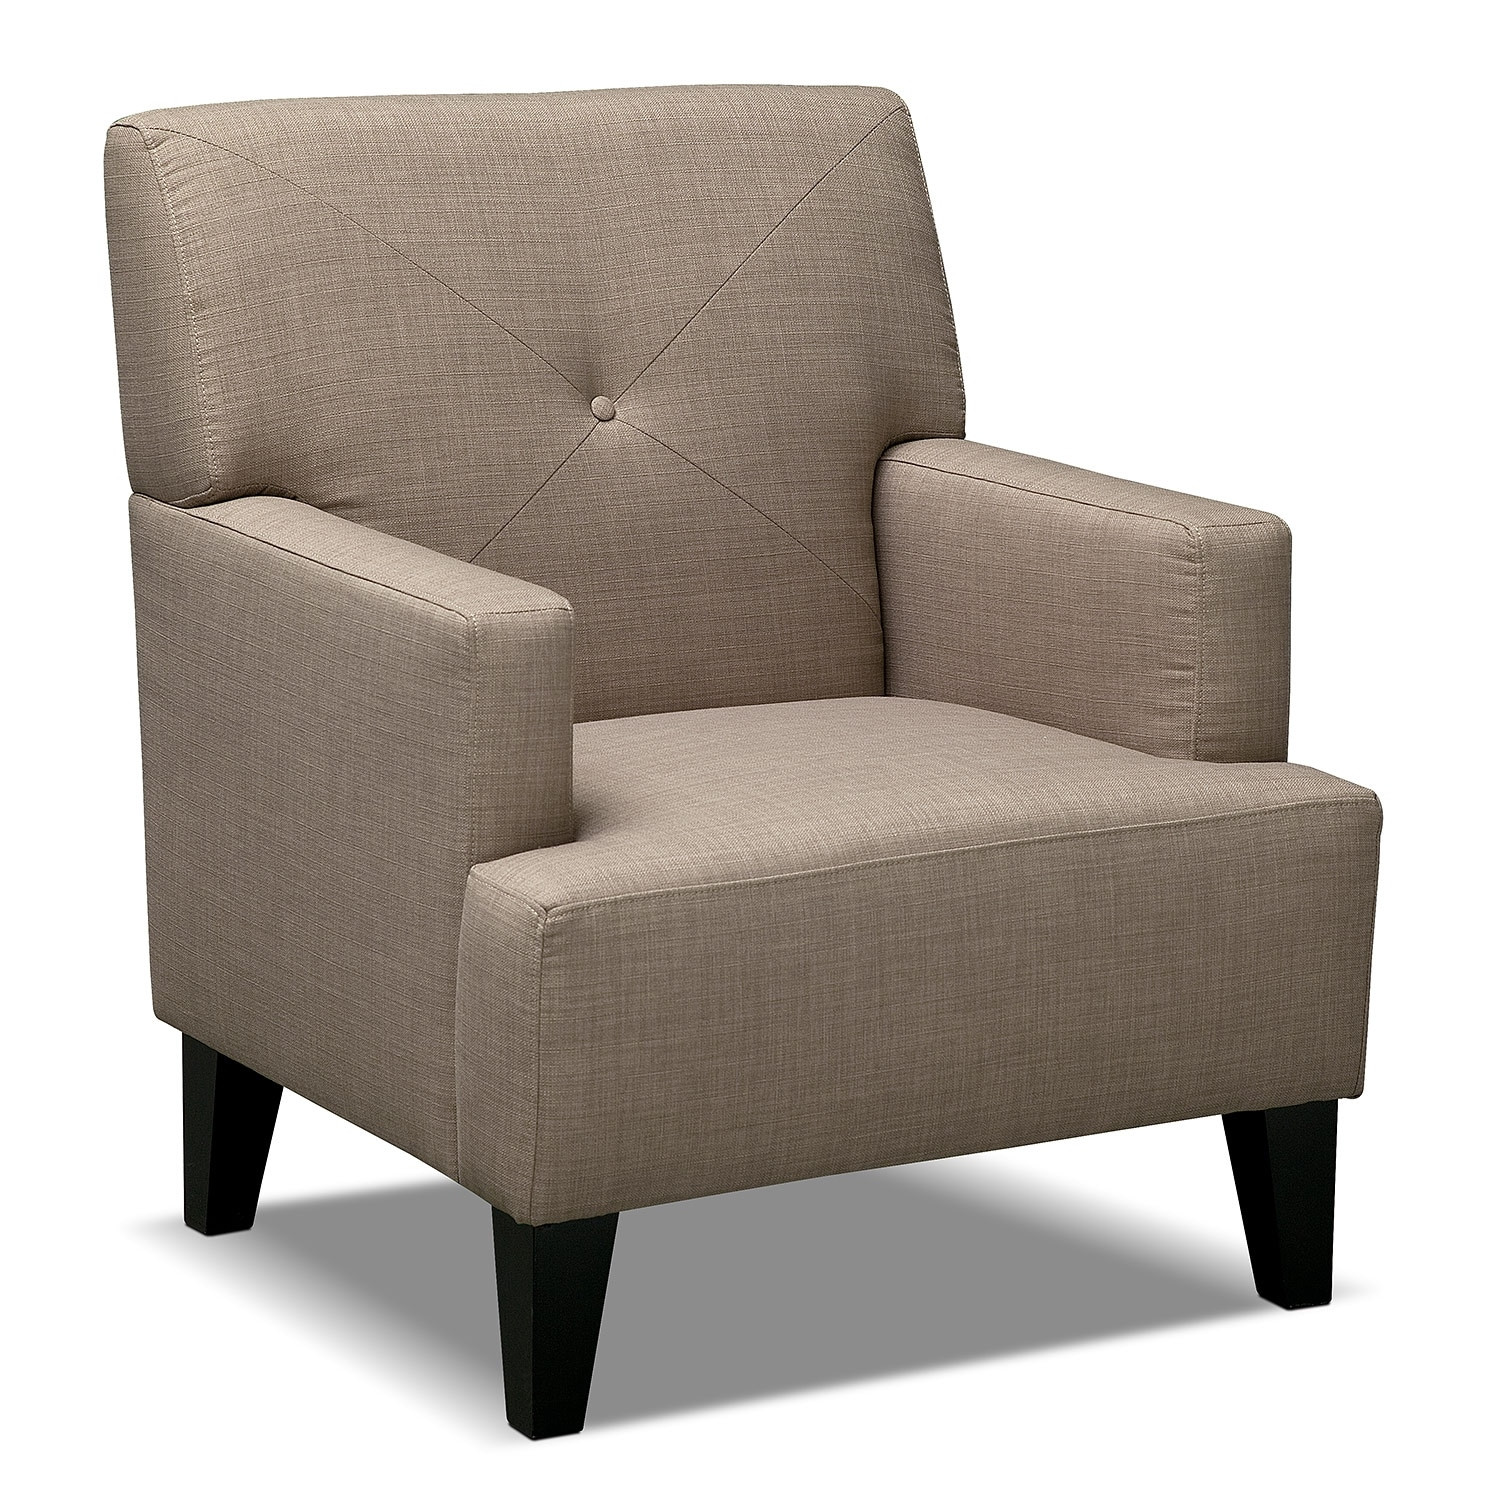 Value City Living Room Tables
 Avalon Accent Chair Wheat